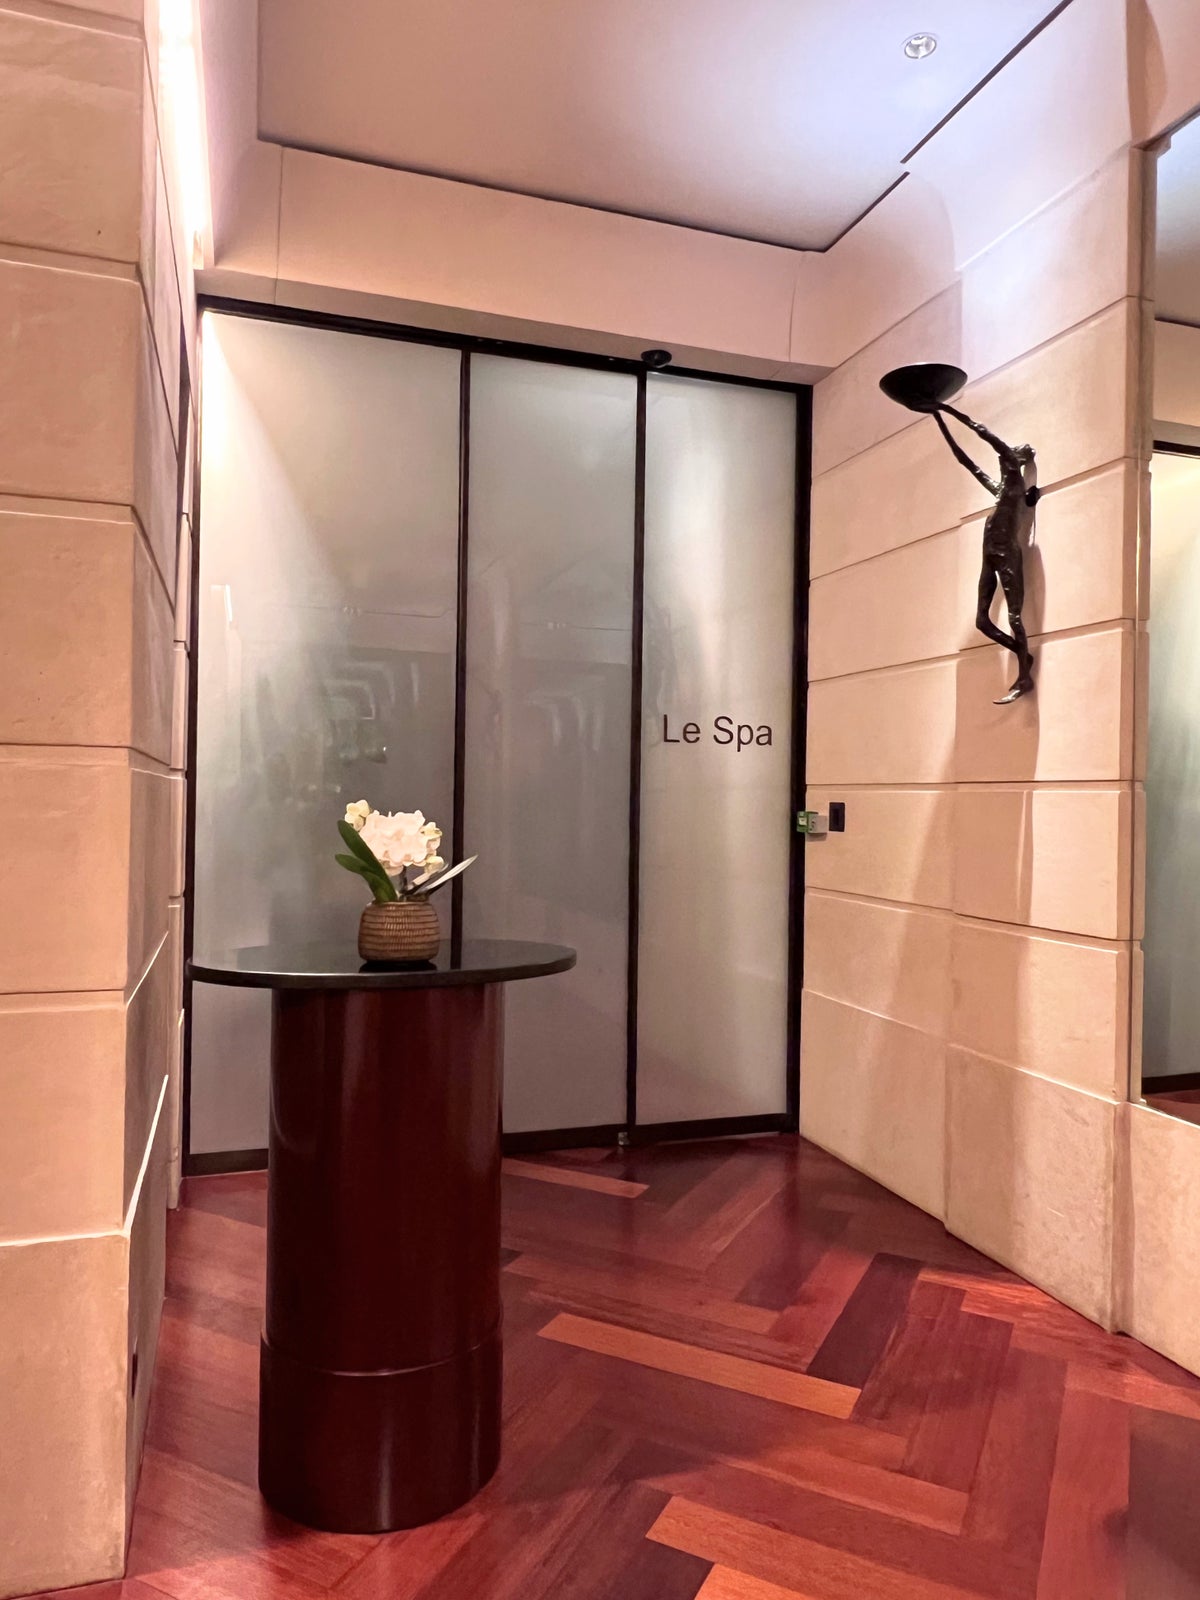 Entrance to the spa and gym at Park Hyatt Paris